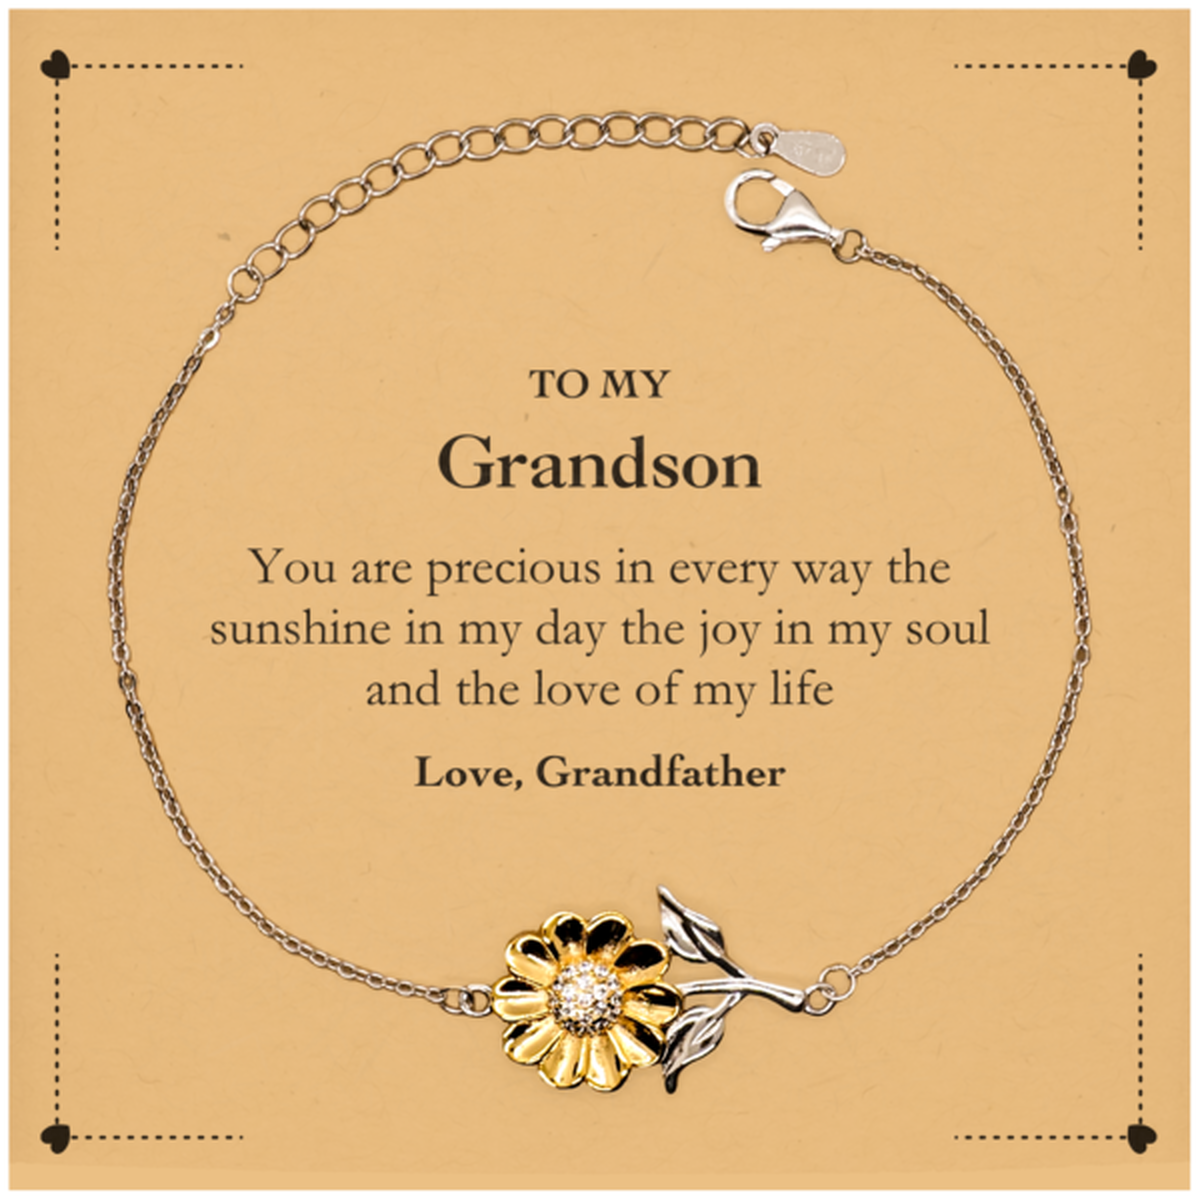 Graduation Gifts for Grandson Sunflower Bracelet Present from Grandfather, Christmas Grandson Birthday Gifts Grandson You are precious in every way the sunshine in my day. Love, Grandfather